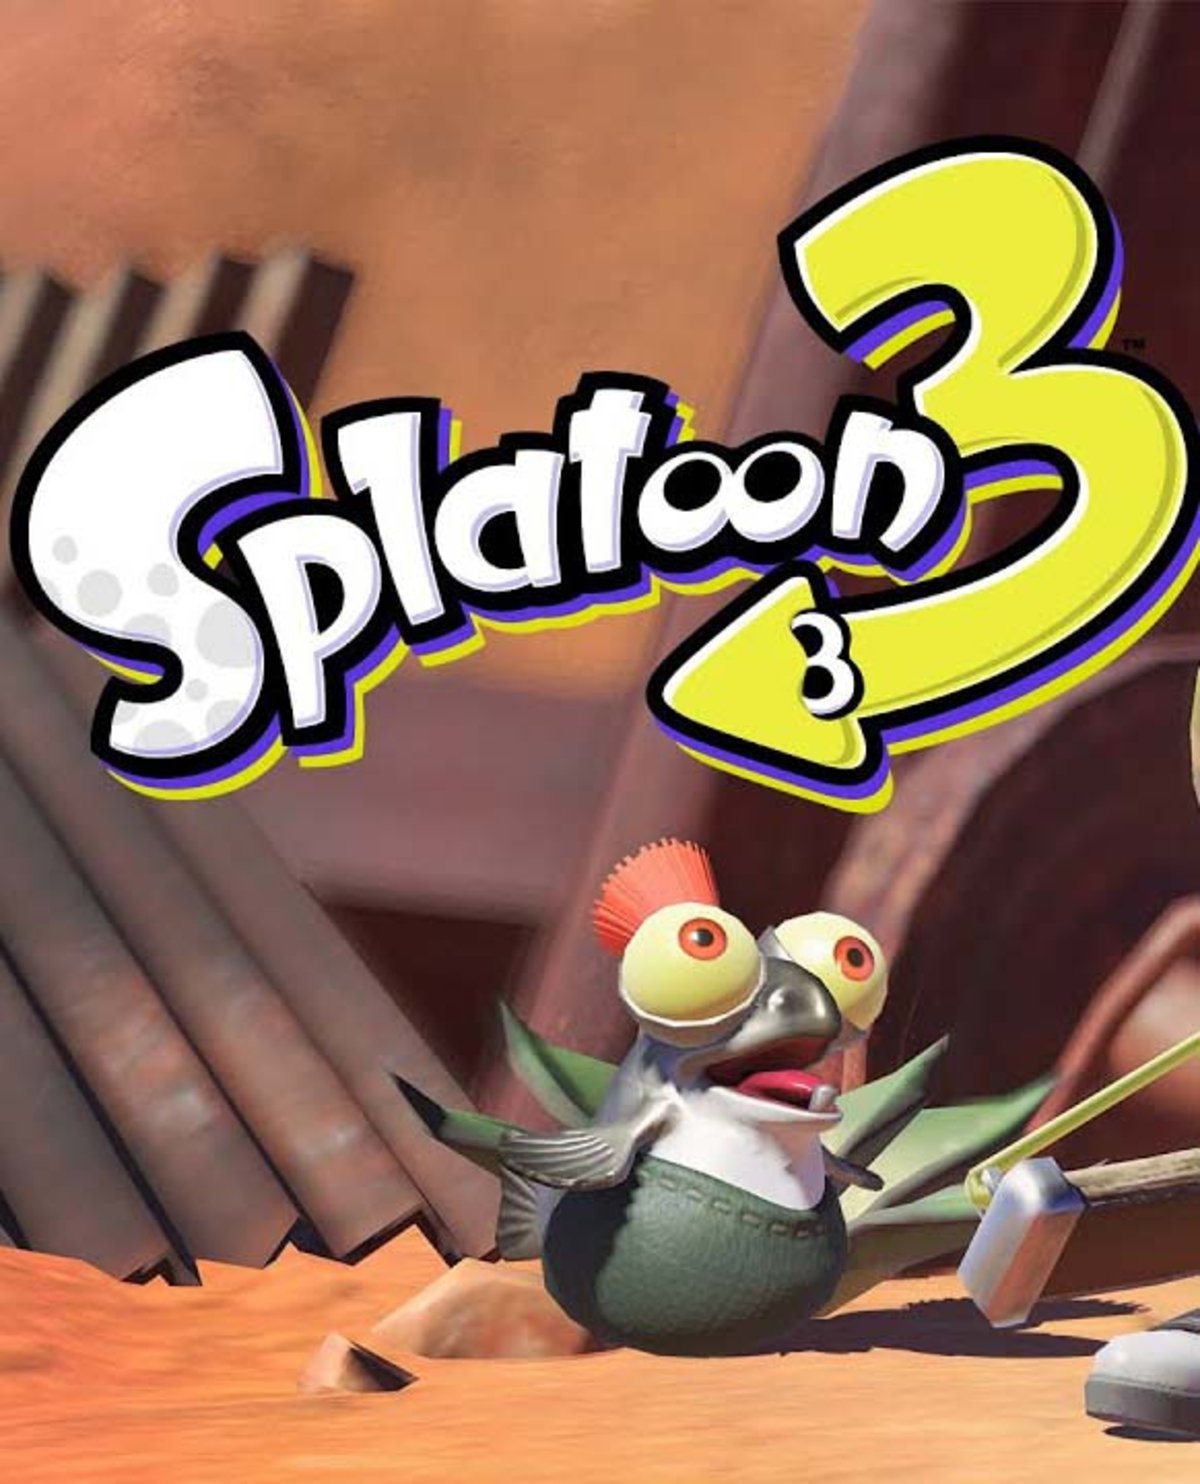 Splatoon 3 presents its story mode in the Nintendo Direct